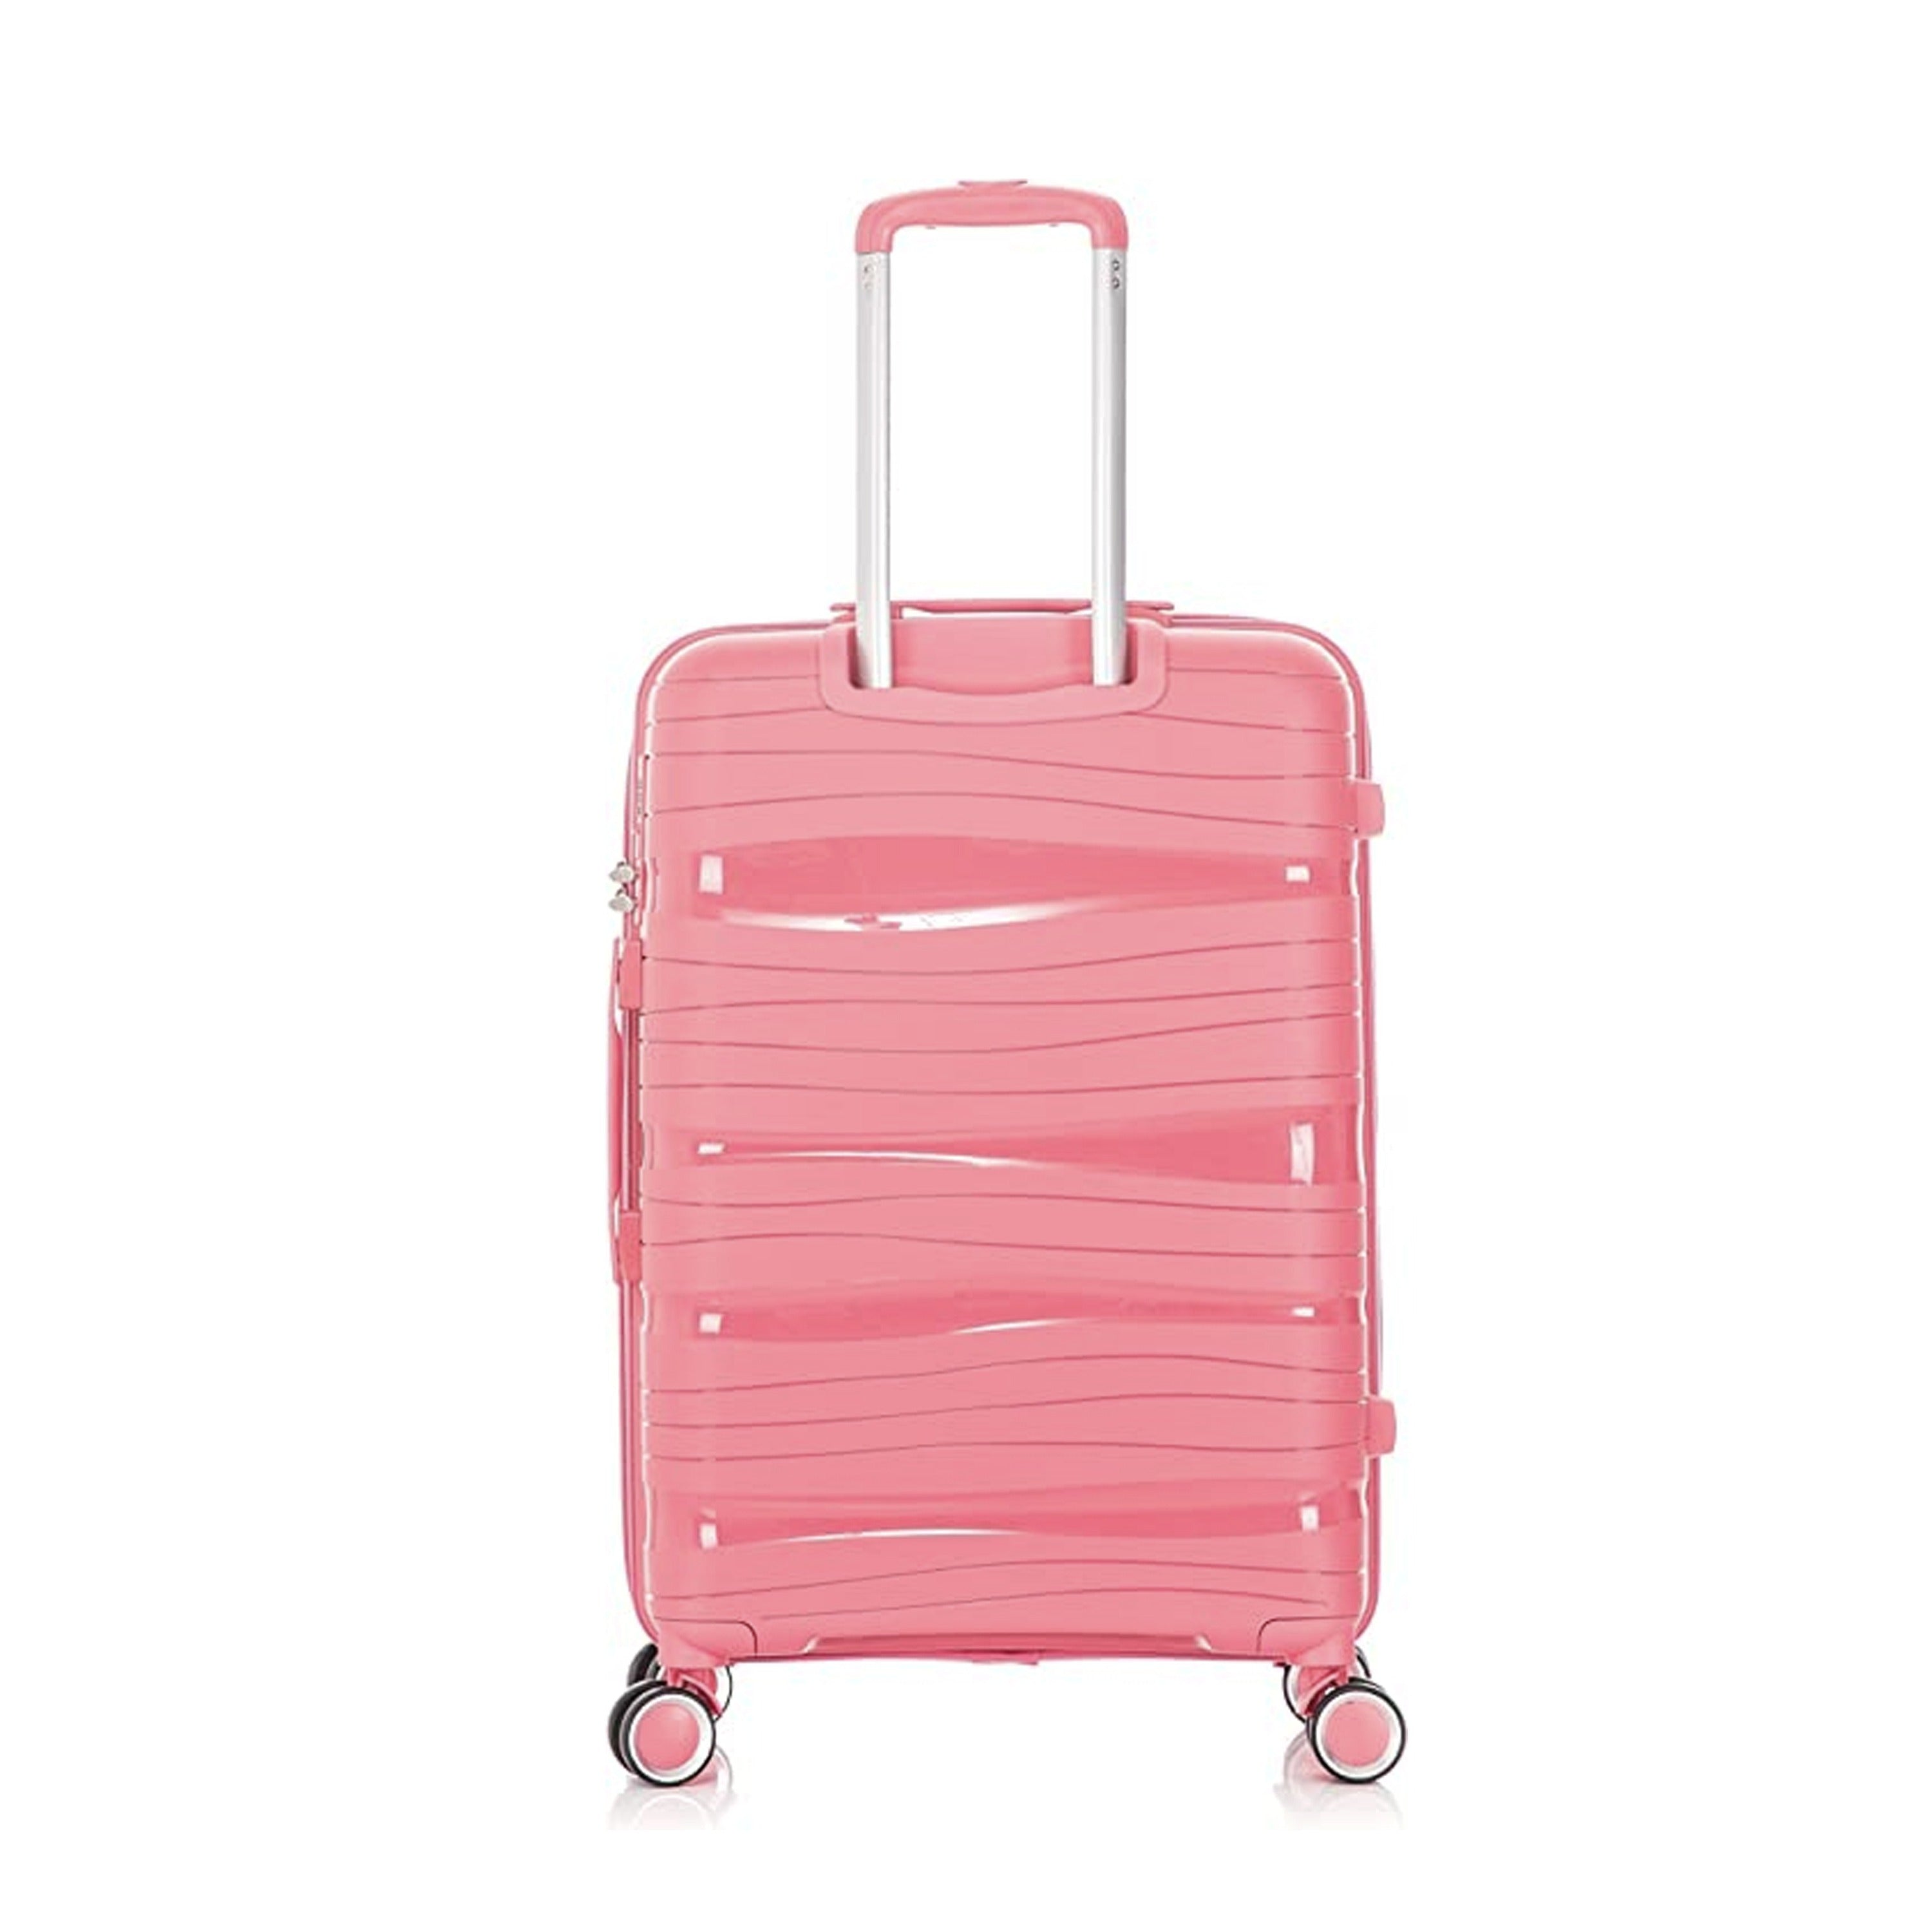 28" Light Pink Colour Royal PP Luggage Lightweight Hard Case Trolley Bag with Double Spinner Wheel